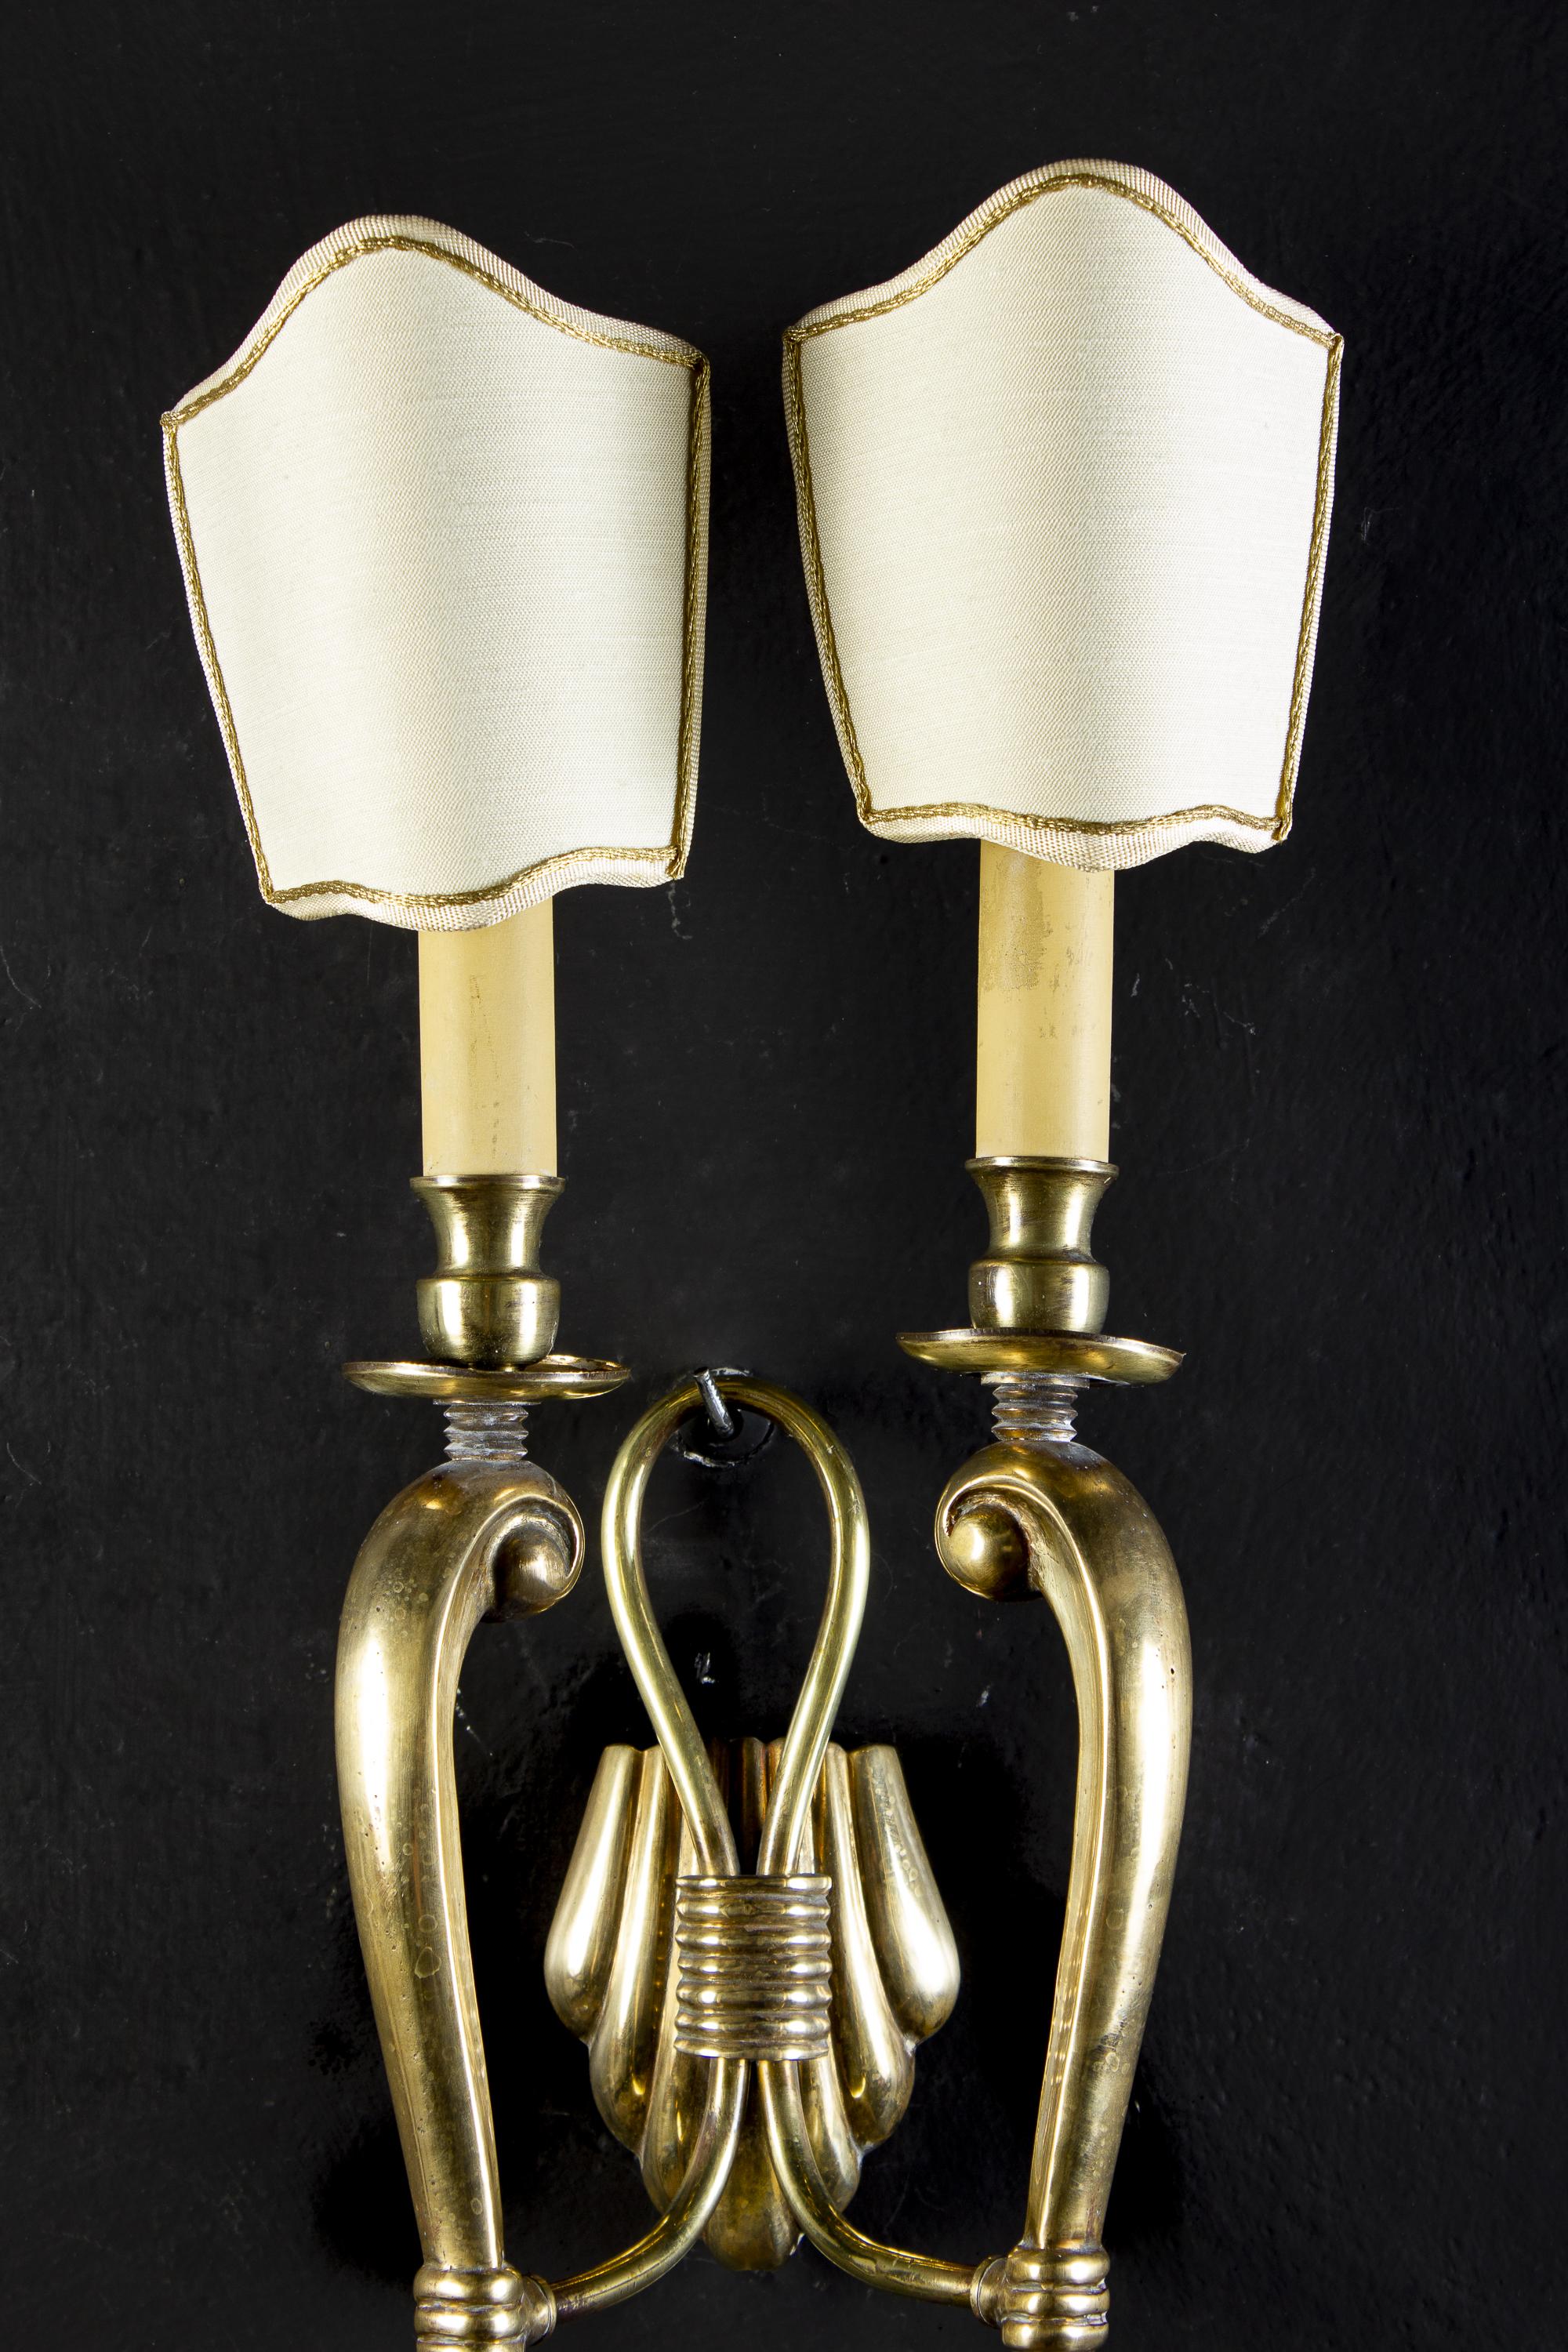 Italian Pair of Midcentury Brass Scones or Wall Lights Italy Guglielmo Ulrich Style 1940 For Sale